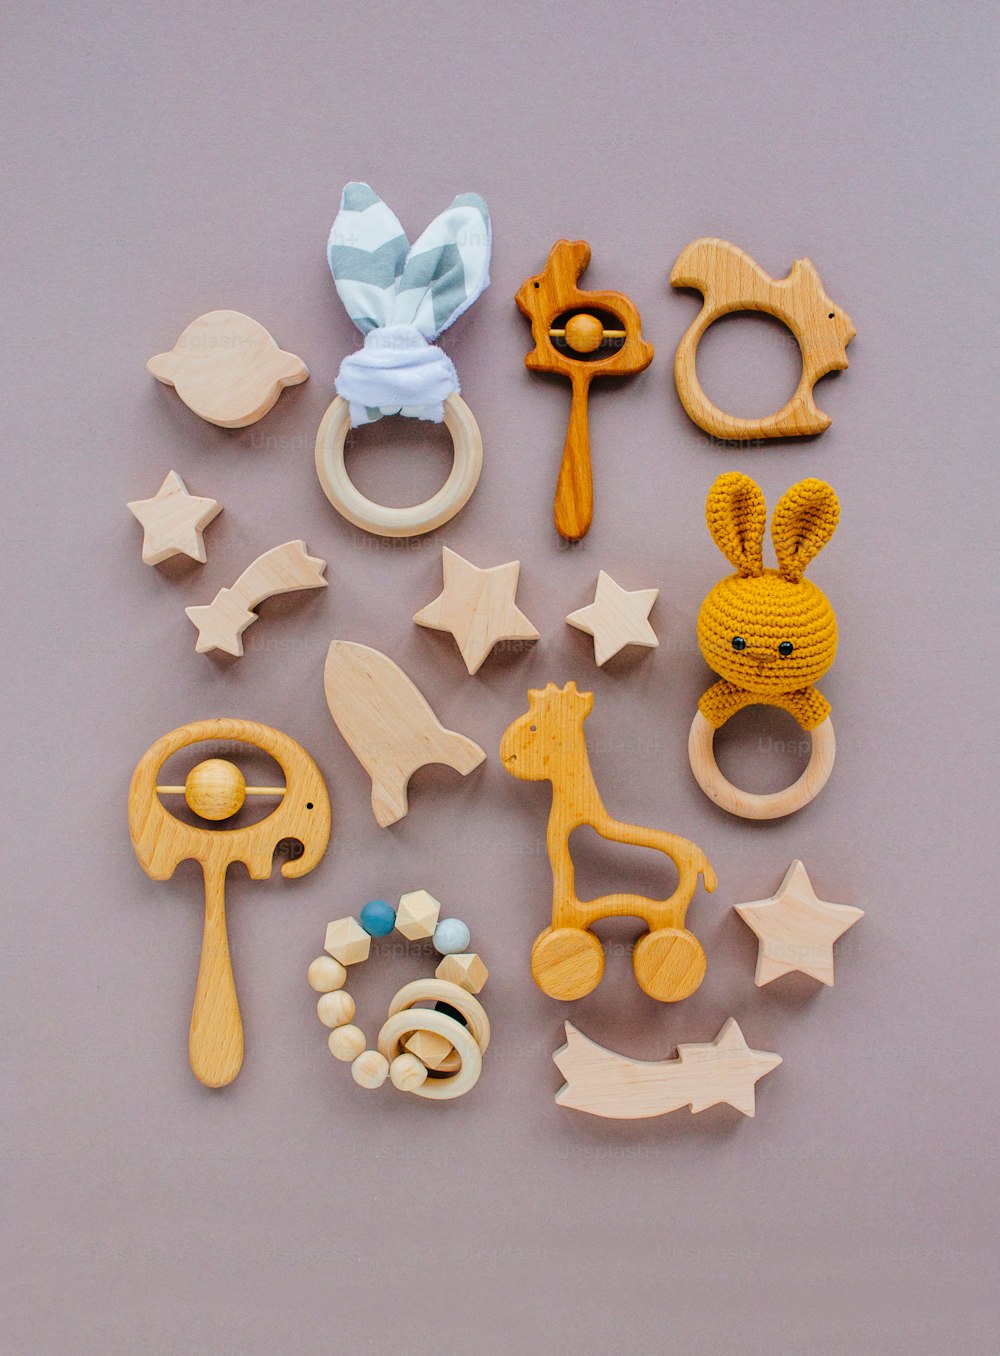 Eco friendly non plastic toys concept. Wooden toys and teethers on grey background with blank space for text.